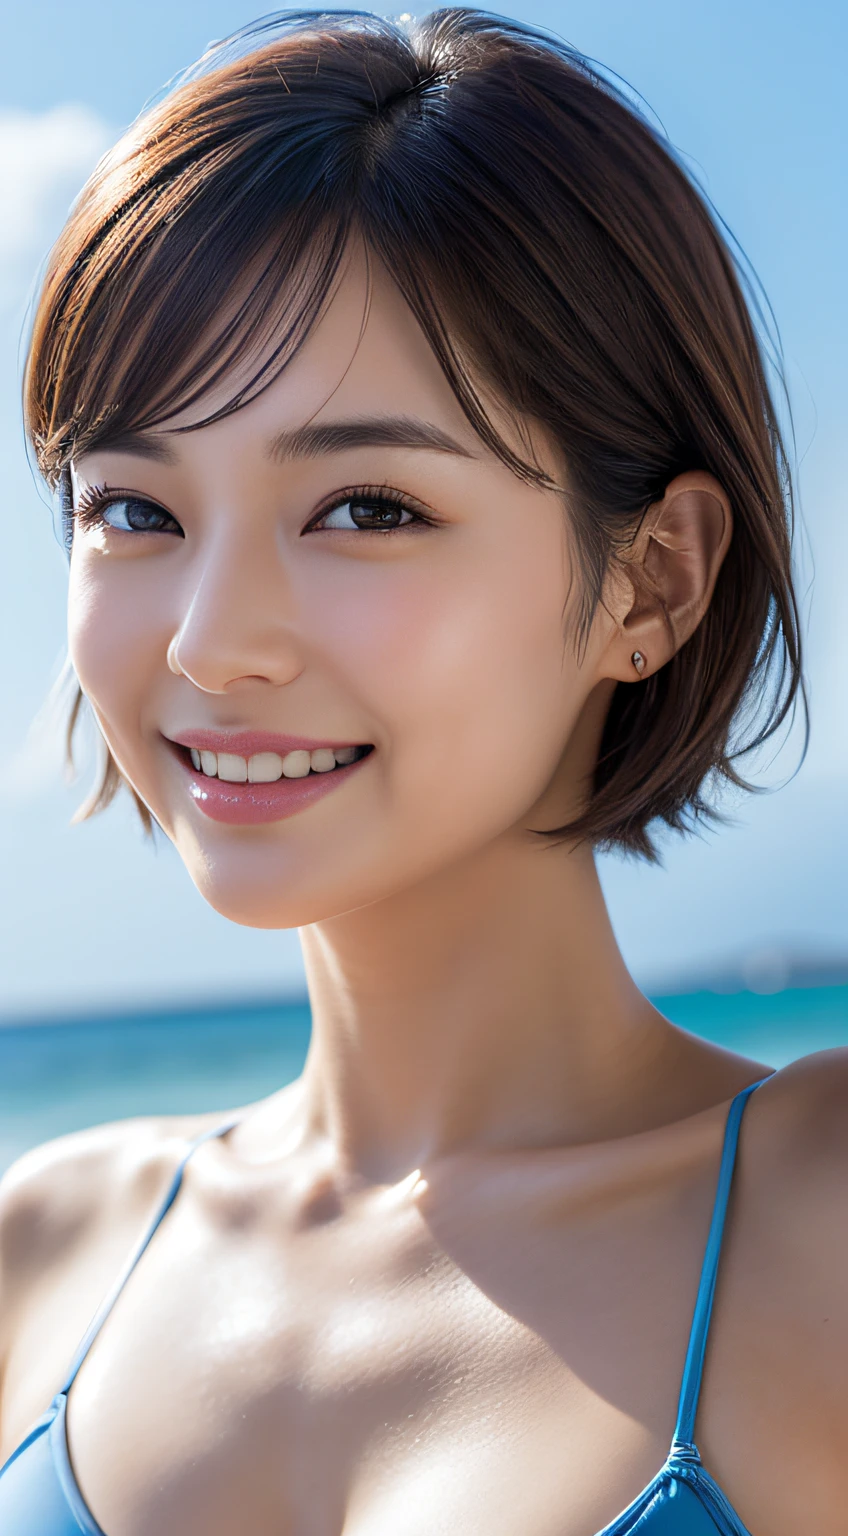 top-quality、top-quality、realisitic、Unity、8k wallpaper、Official art、Highly detailed CG Unity 8k wallpaper、ultra-detailliert、hight resolution、Physically-based rendering、ultra-detailliert,magnifica, finely detail,1girl in, (Very short hair), (Smile Face:1.1), Slim Face, Pretty Lady, hyperdetailed face, Detailed eye, View, Blurred background, (Colossal tits), (Chest to head), frontage, Slim Face, on the beach, profetional lighting, (Lighting the face:1.3), best light, (Adult Bikini)